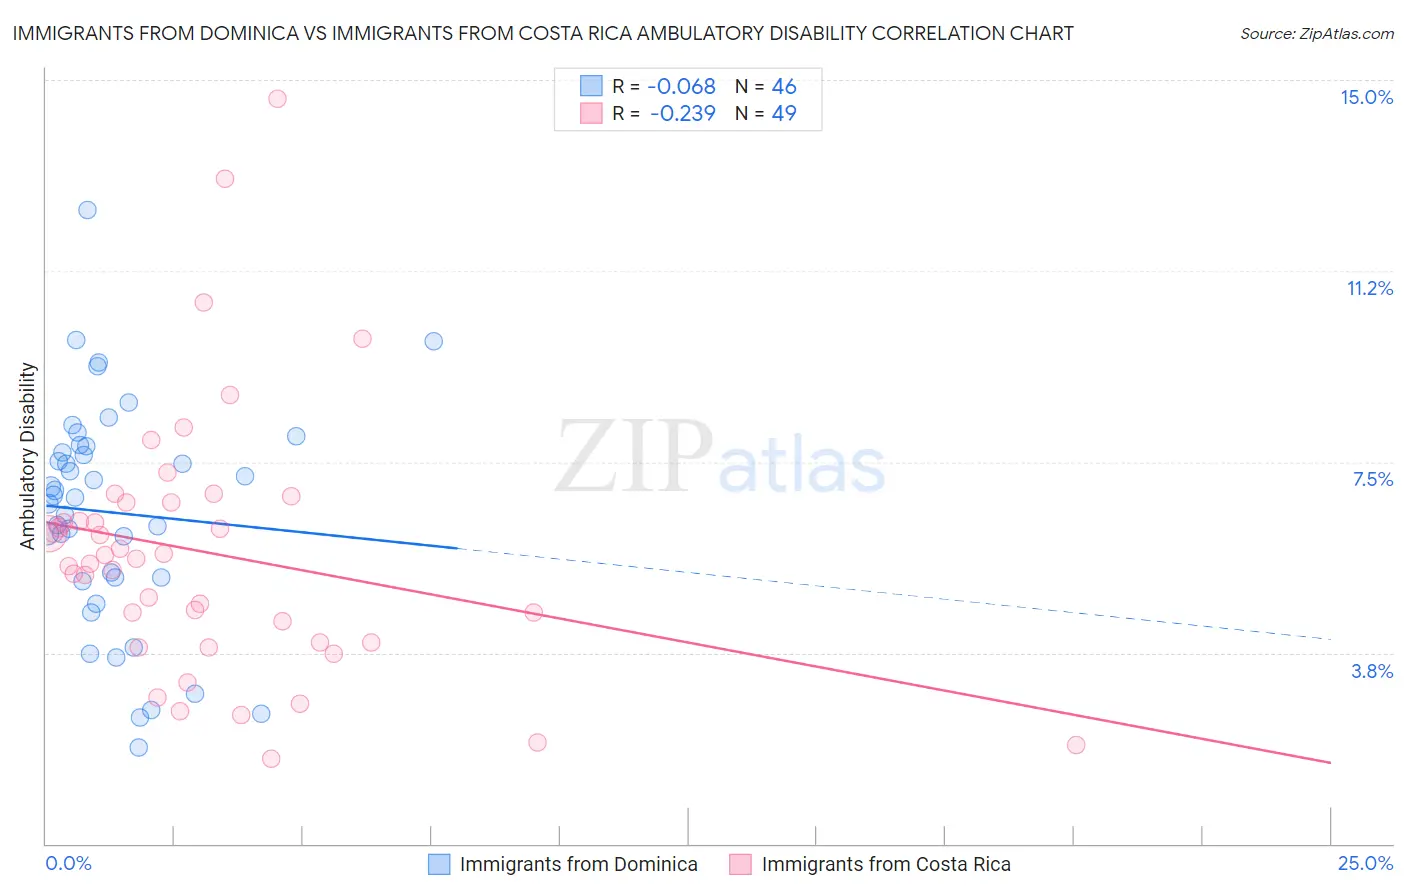 Immigrants from Dominica vs Immigrants from Costa Rica Ambulatory Disability